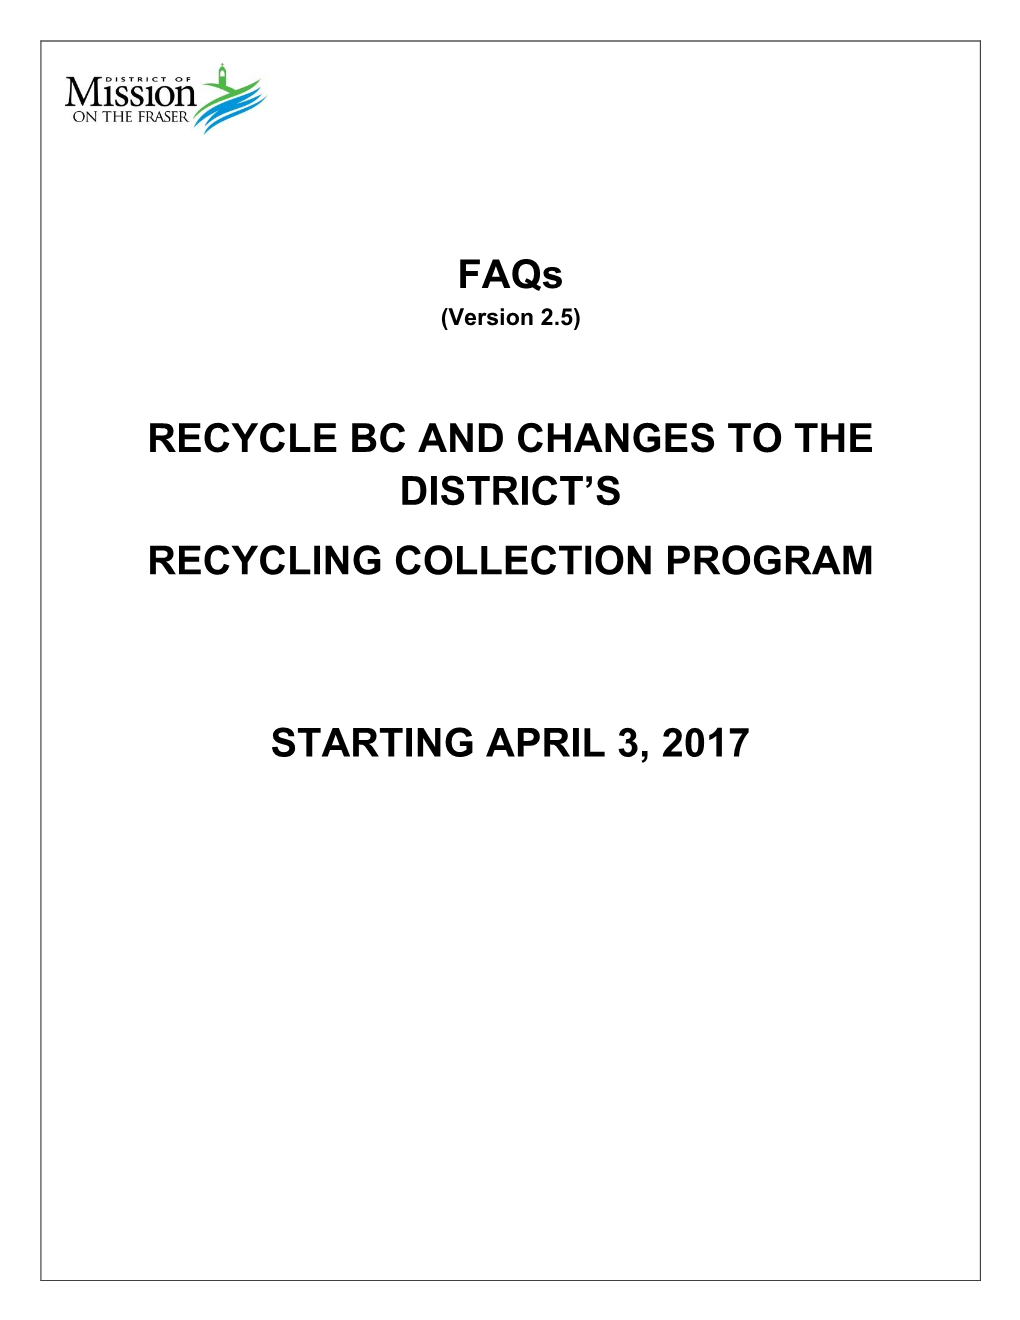 Recycle Bc and Changes to the District’S Recycling Collection Program